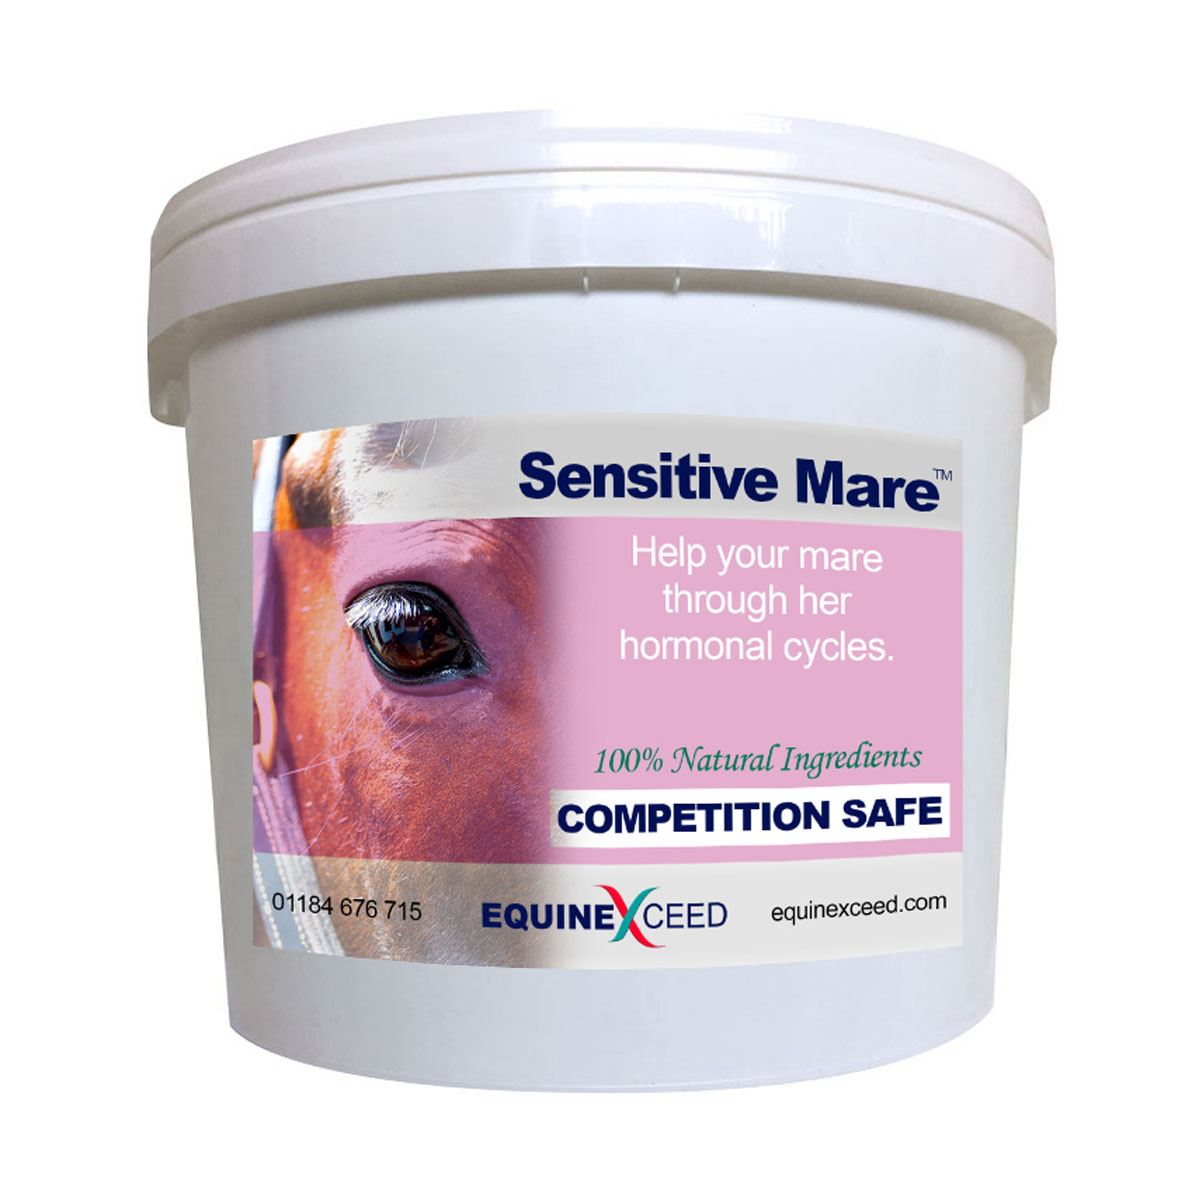 Equine Exceed Sensitive Mare for hormonal support